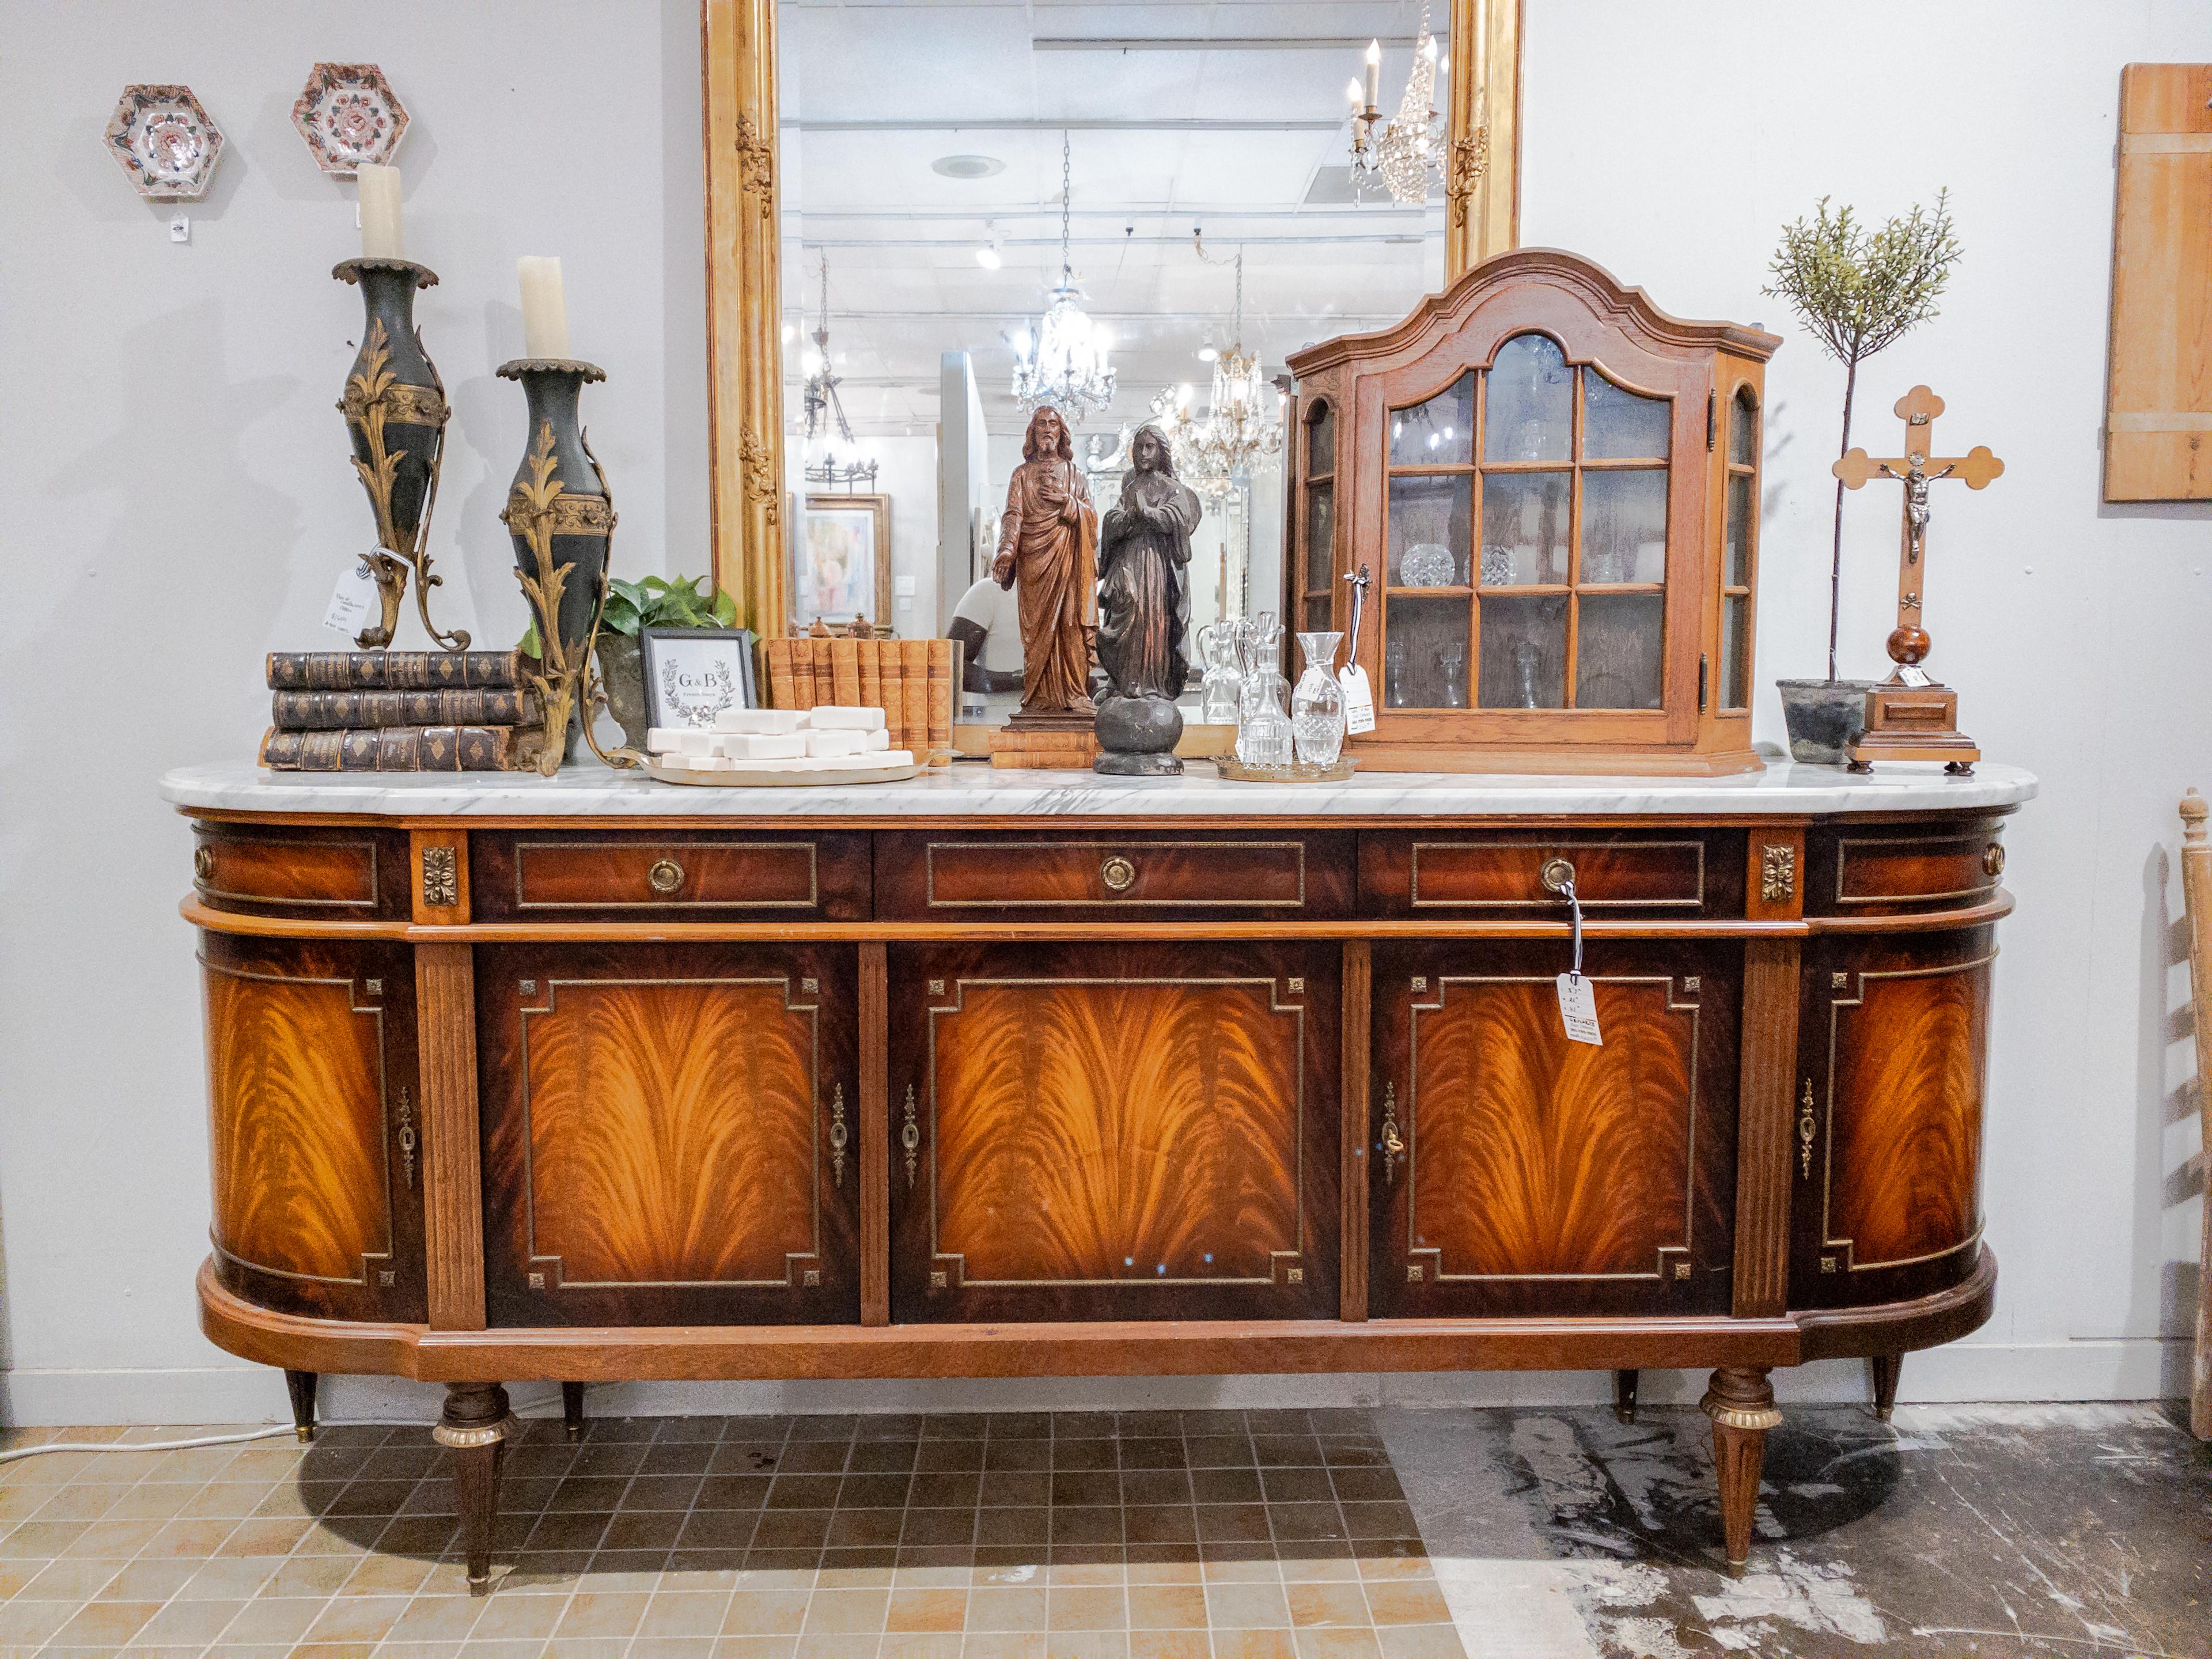 The Impressive Louis XVI Style Marble and Mahogany Buffet is a stunning piece of furniture designed in the classical Louis XVI style, known for its elegance and refinement. The buffet features flame-grained mahogany doors, showcasing the exquisite